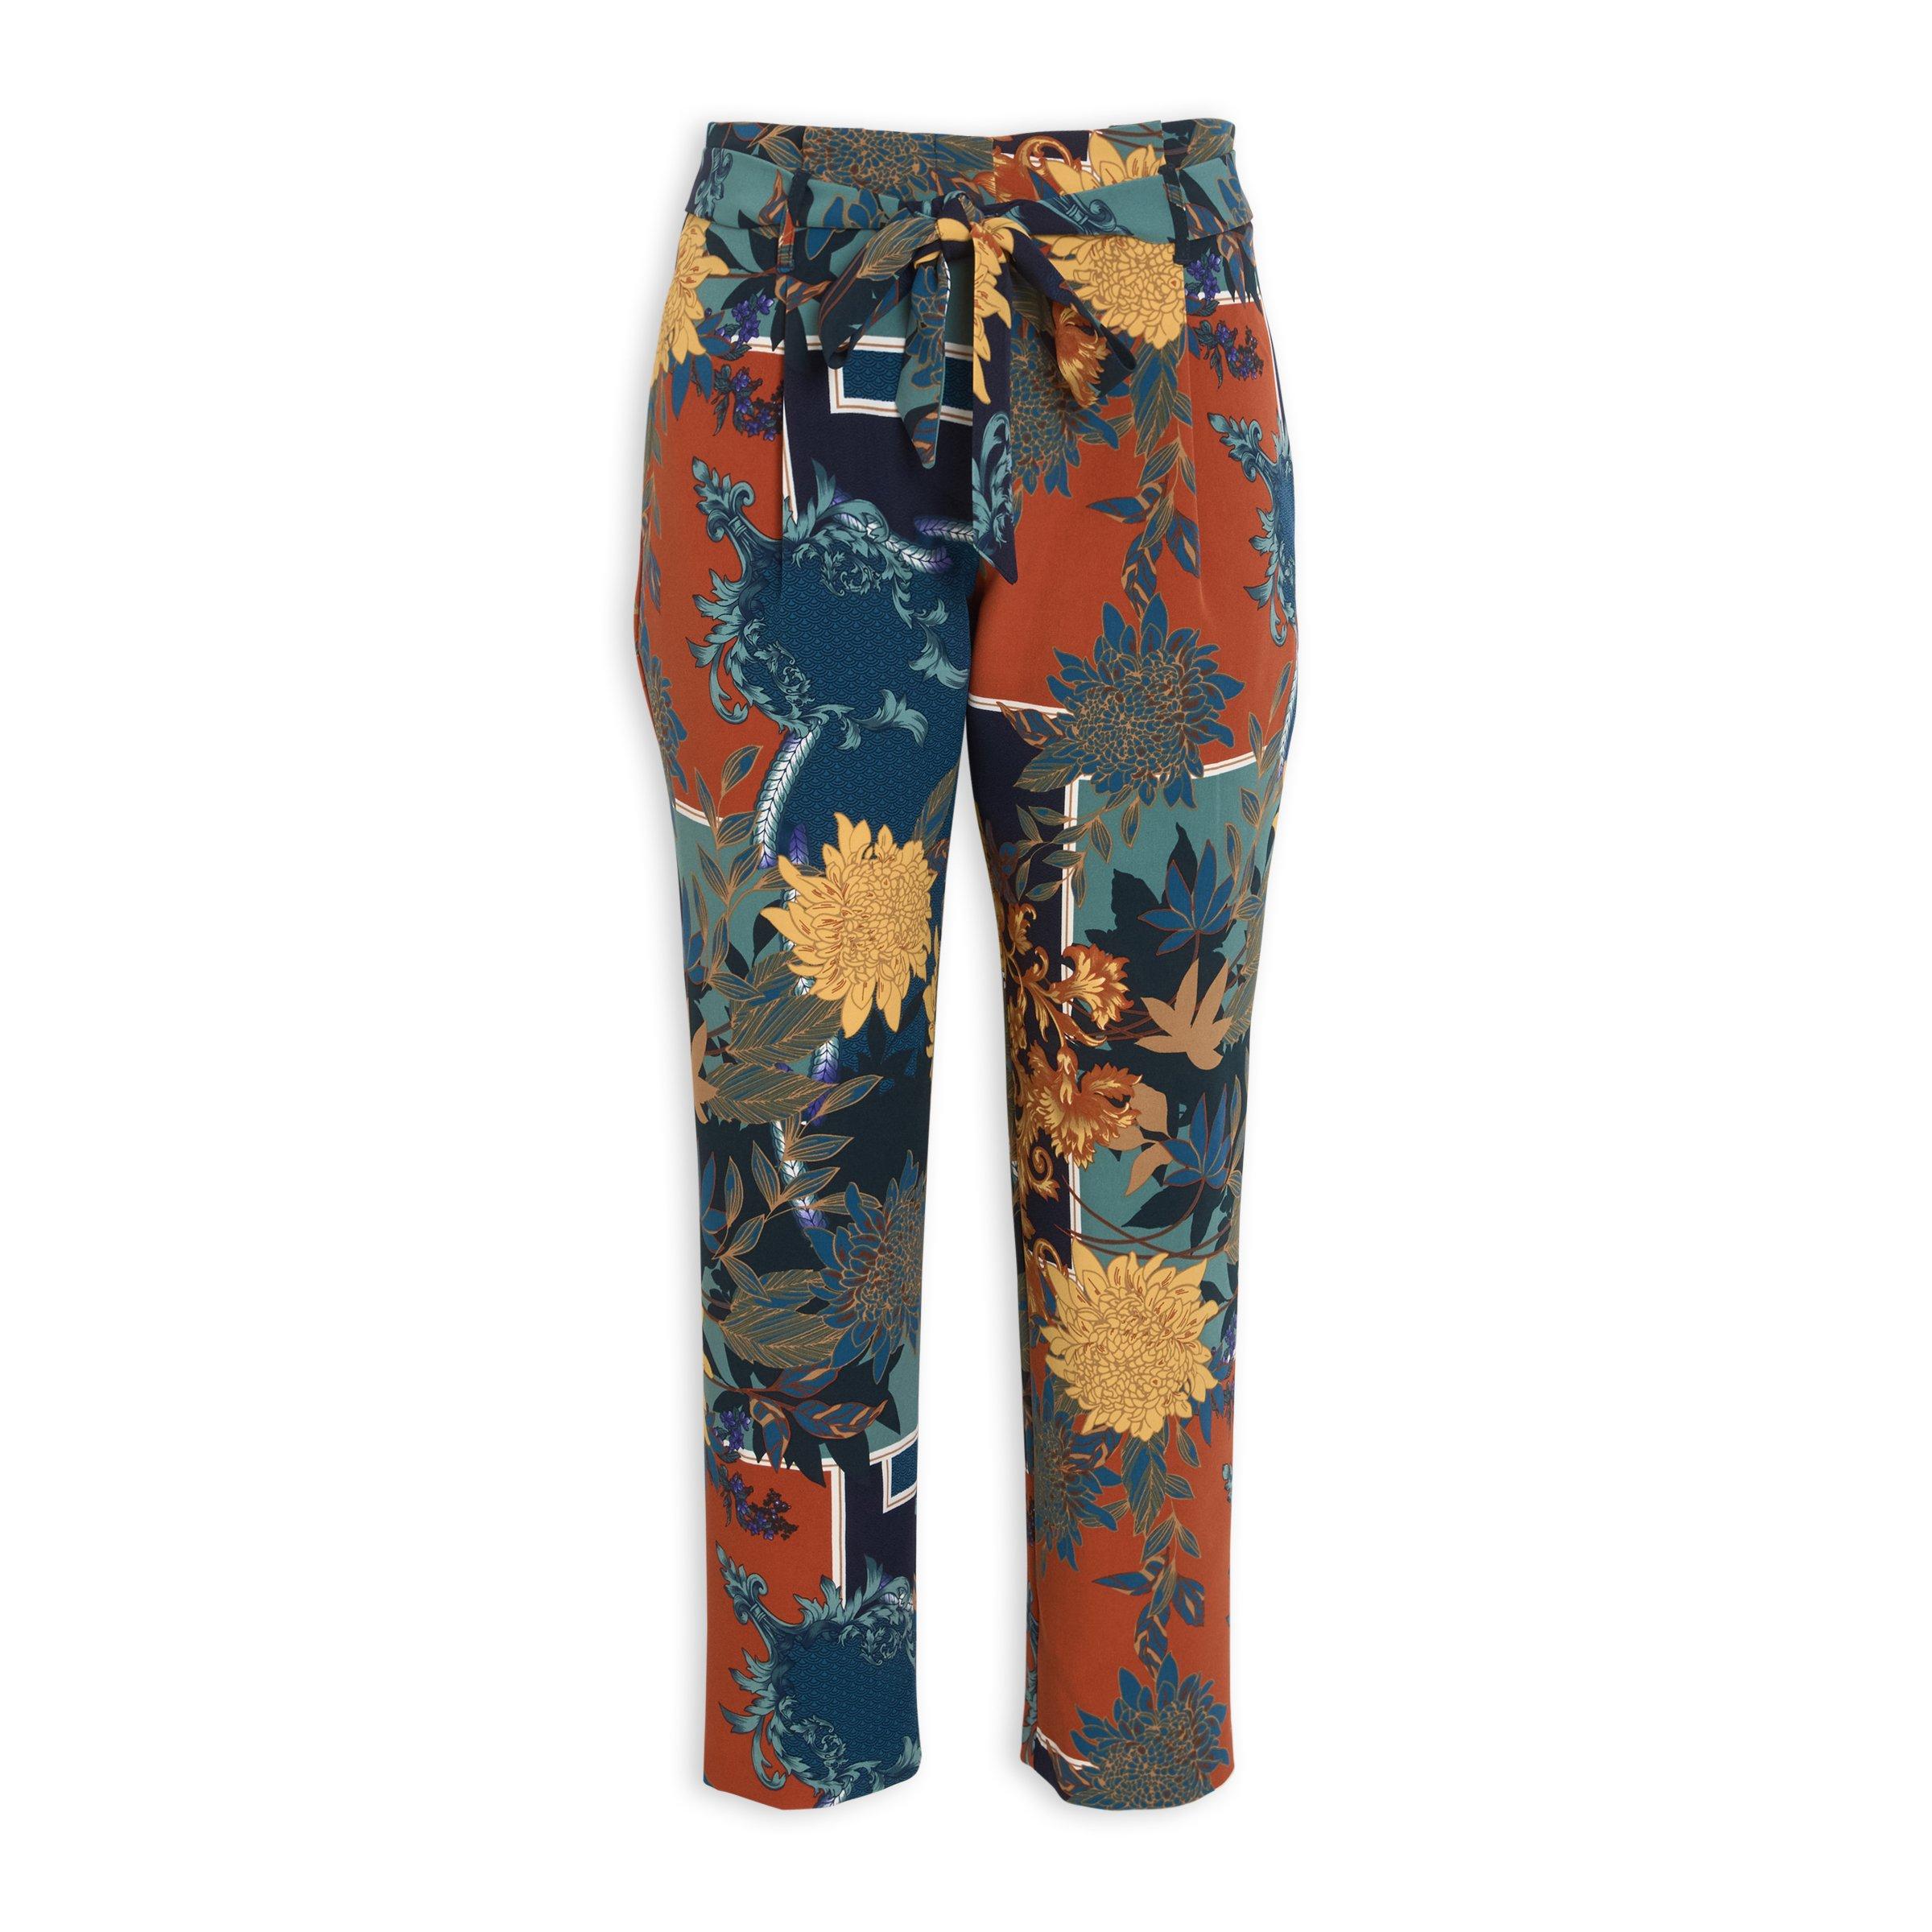 Buy Truworths Printed Tapered Pant Online | Truworths